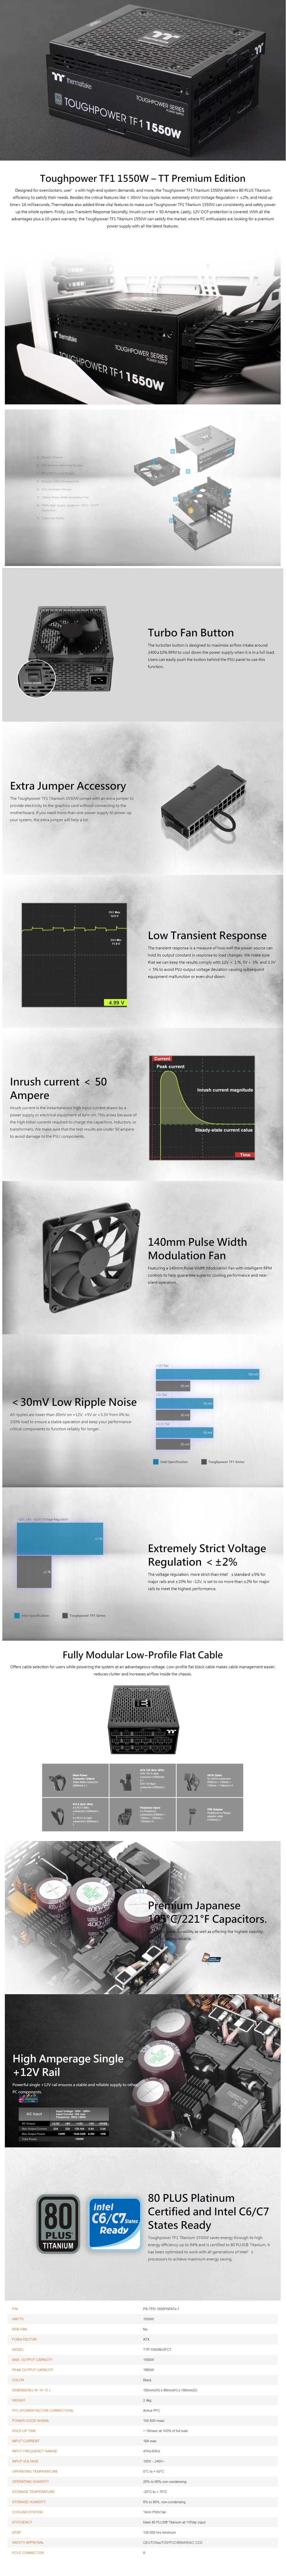 A large marketing image providing additional information about the product Thermaltake Toughpower TF1 - 1550W 80PLUS Titanium ATX Modular PSU - Additional alt info not provided